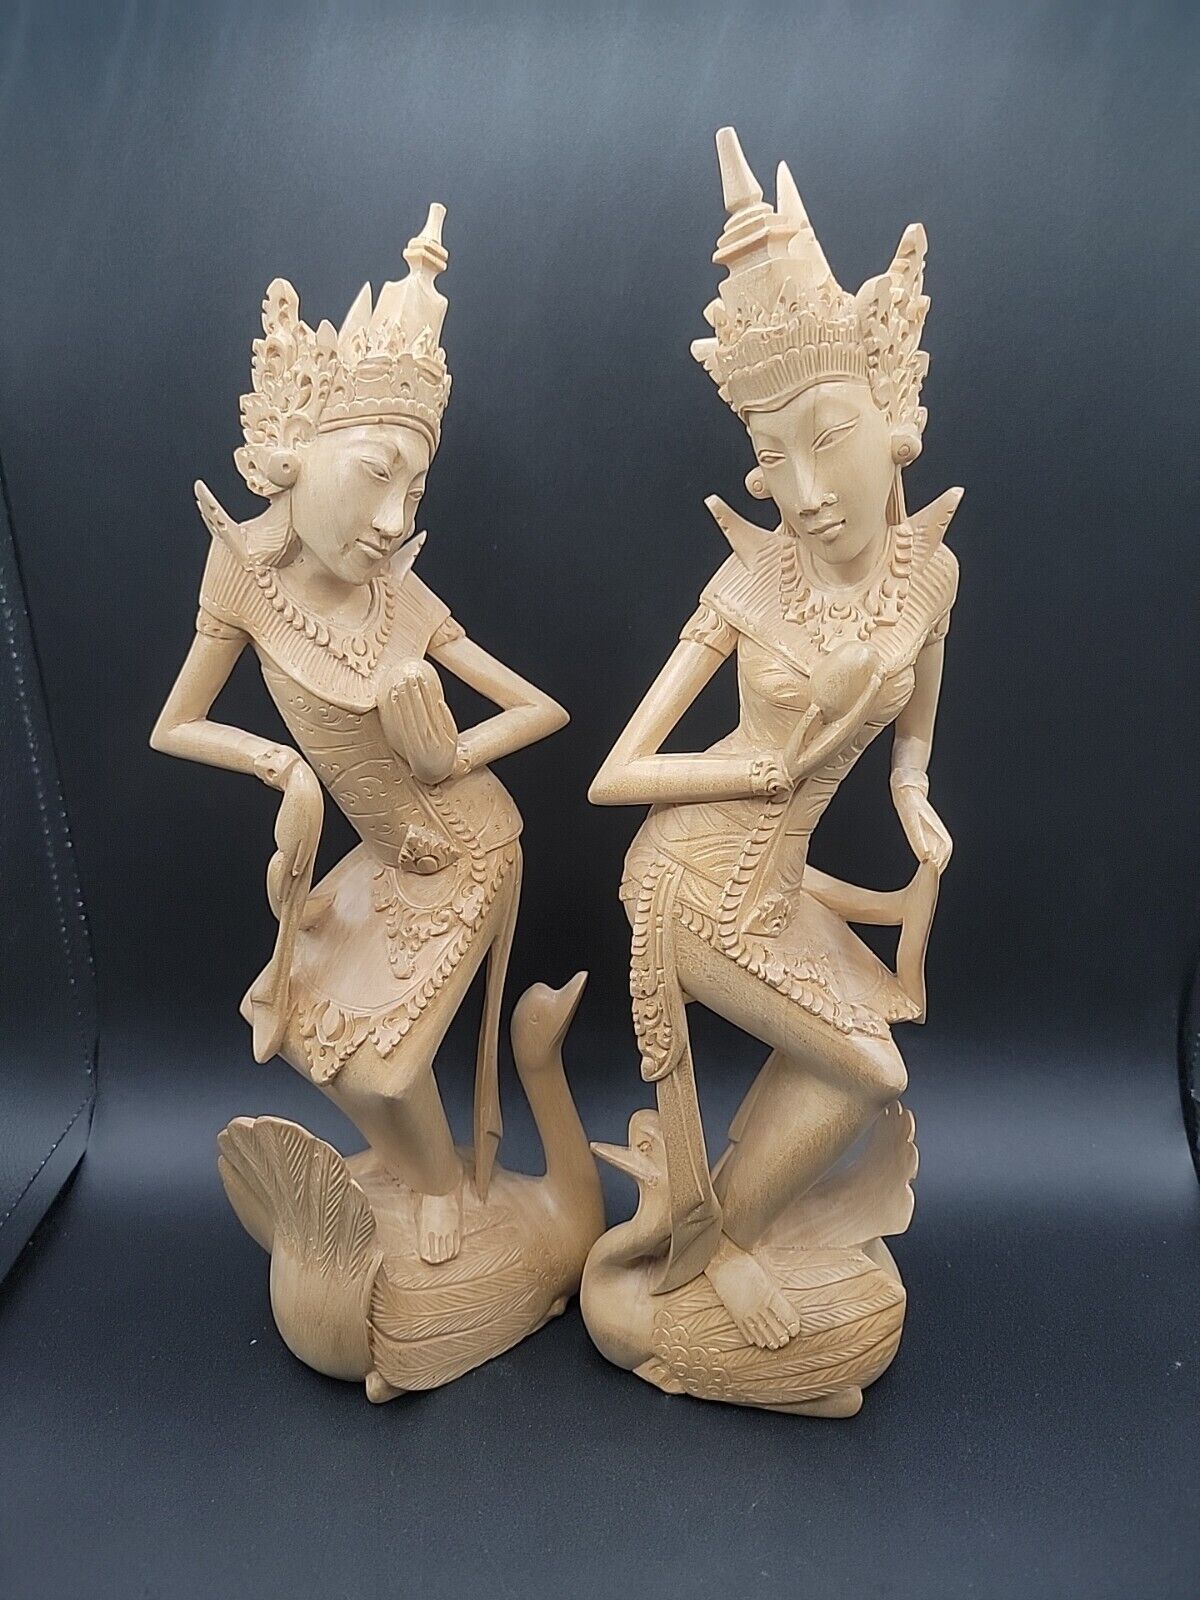 Balinese Statuettes 2 Hand Crafted Folklore Wood Statuettes from Indonesia